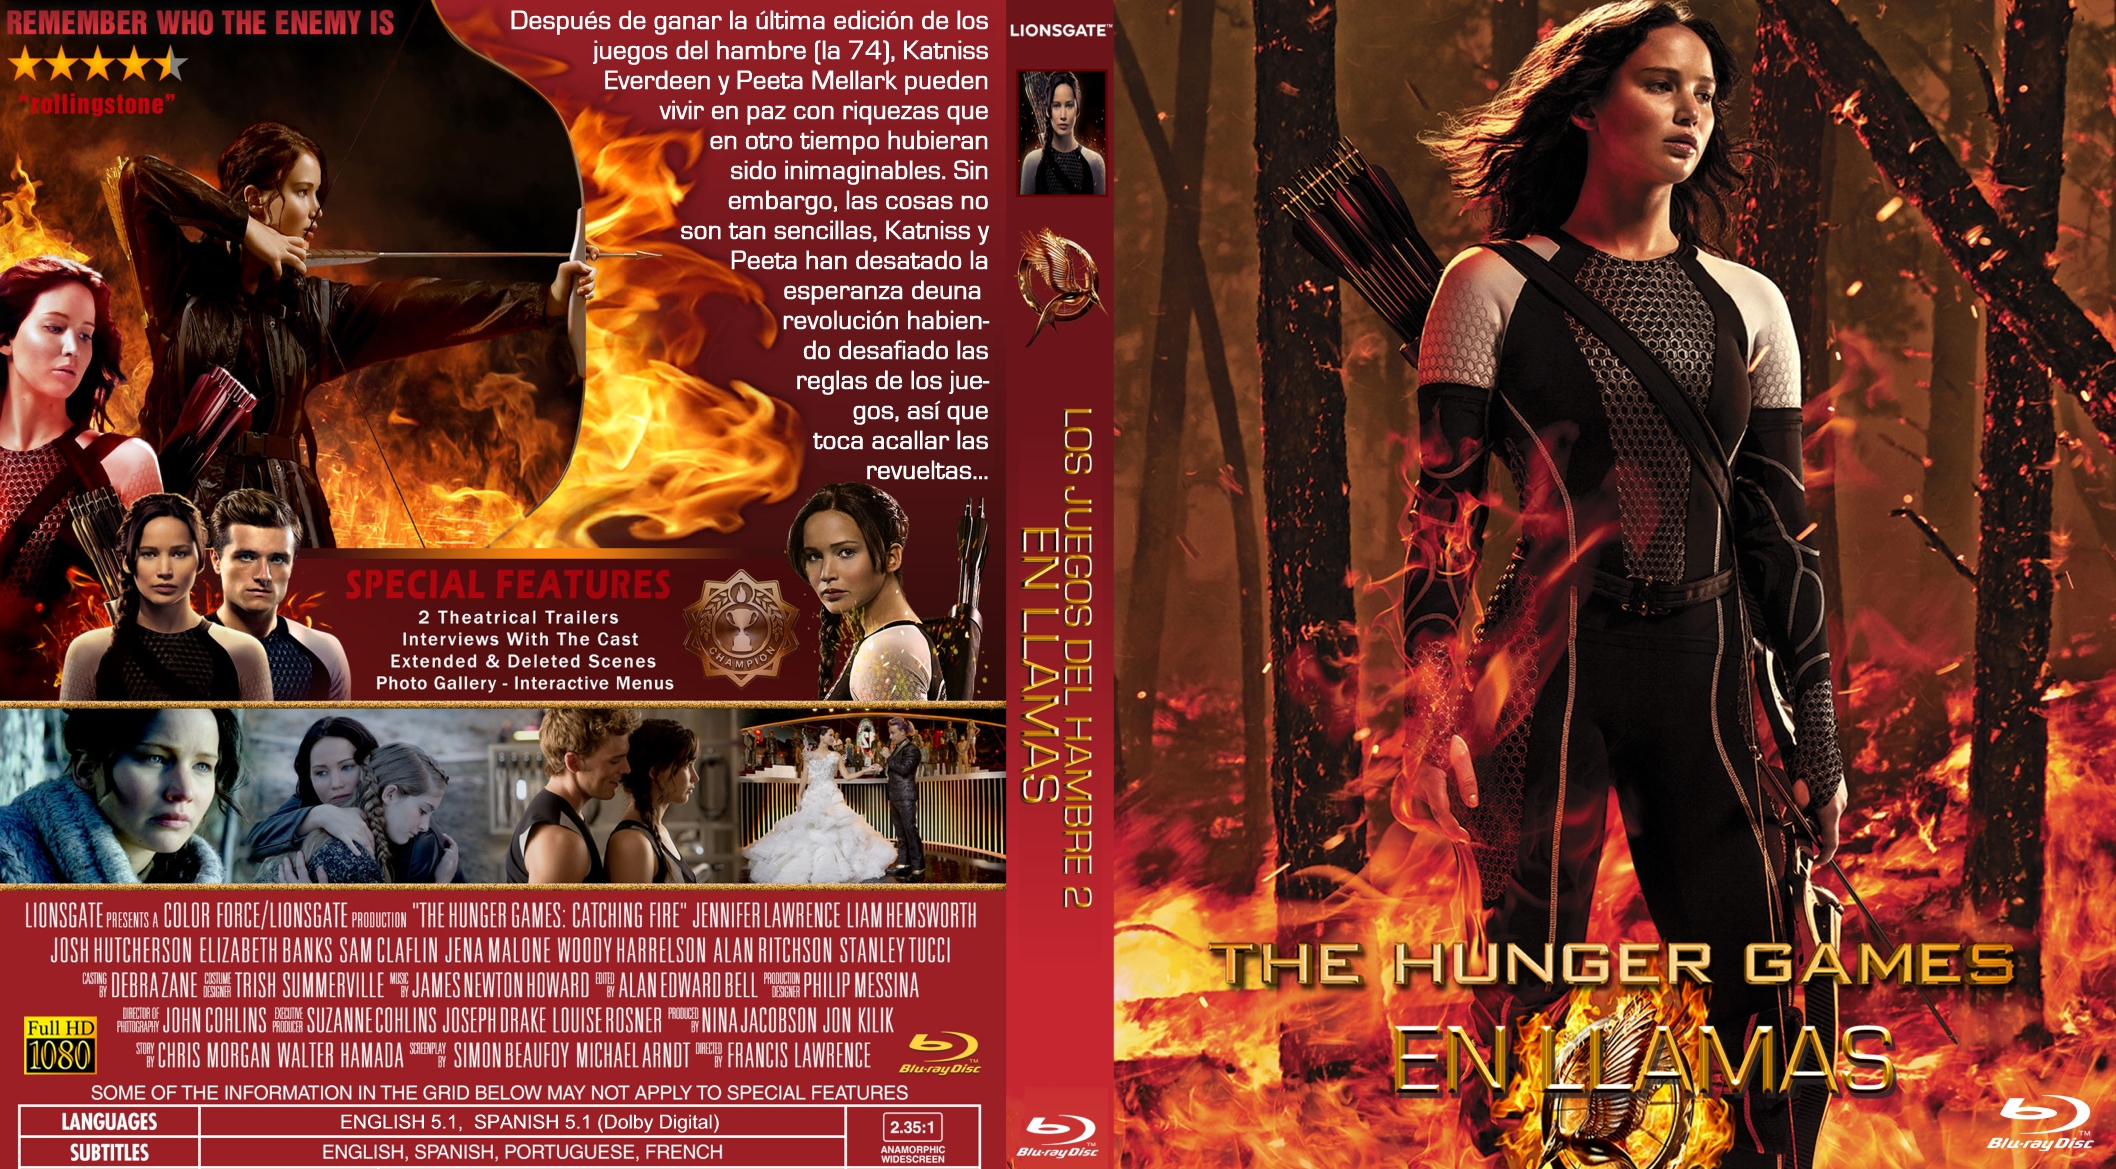 hunger games catching fire blu ray target